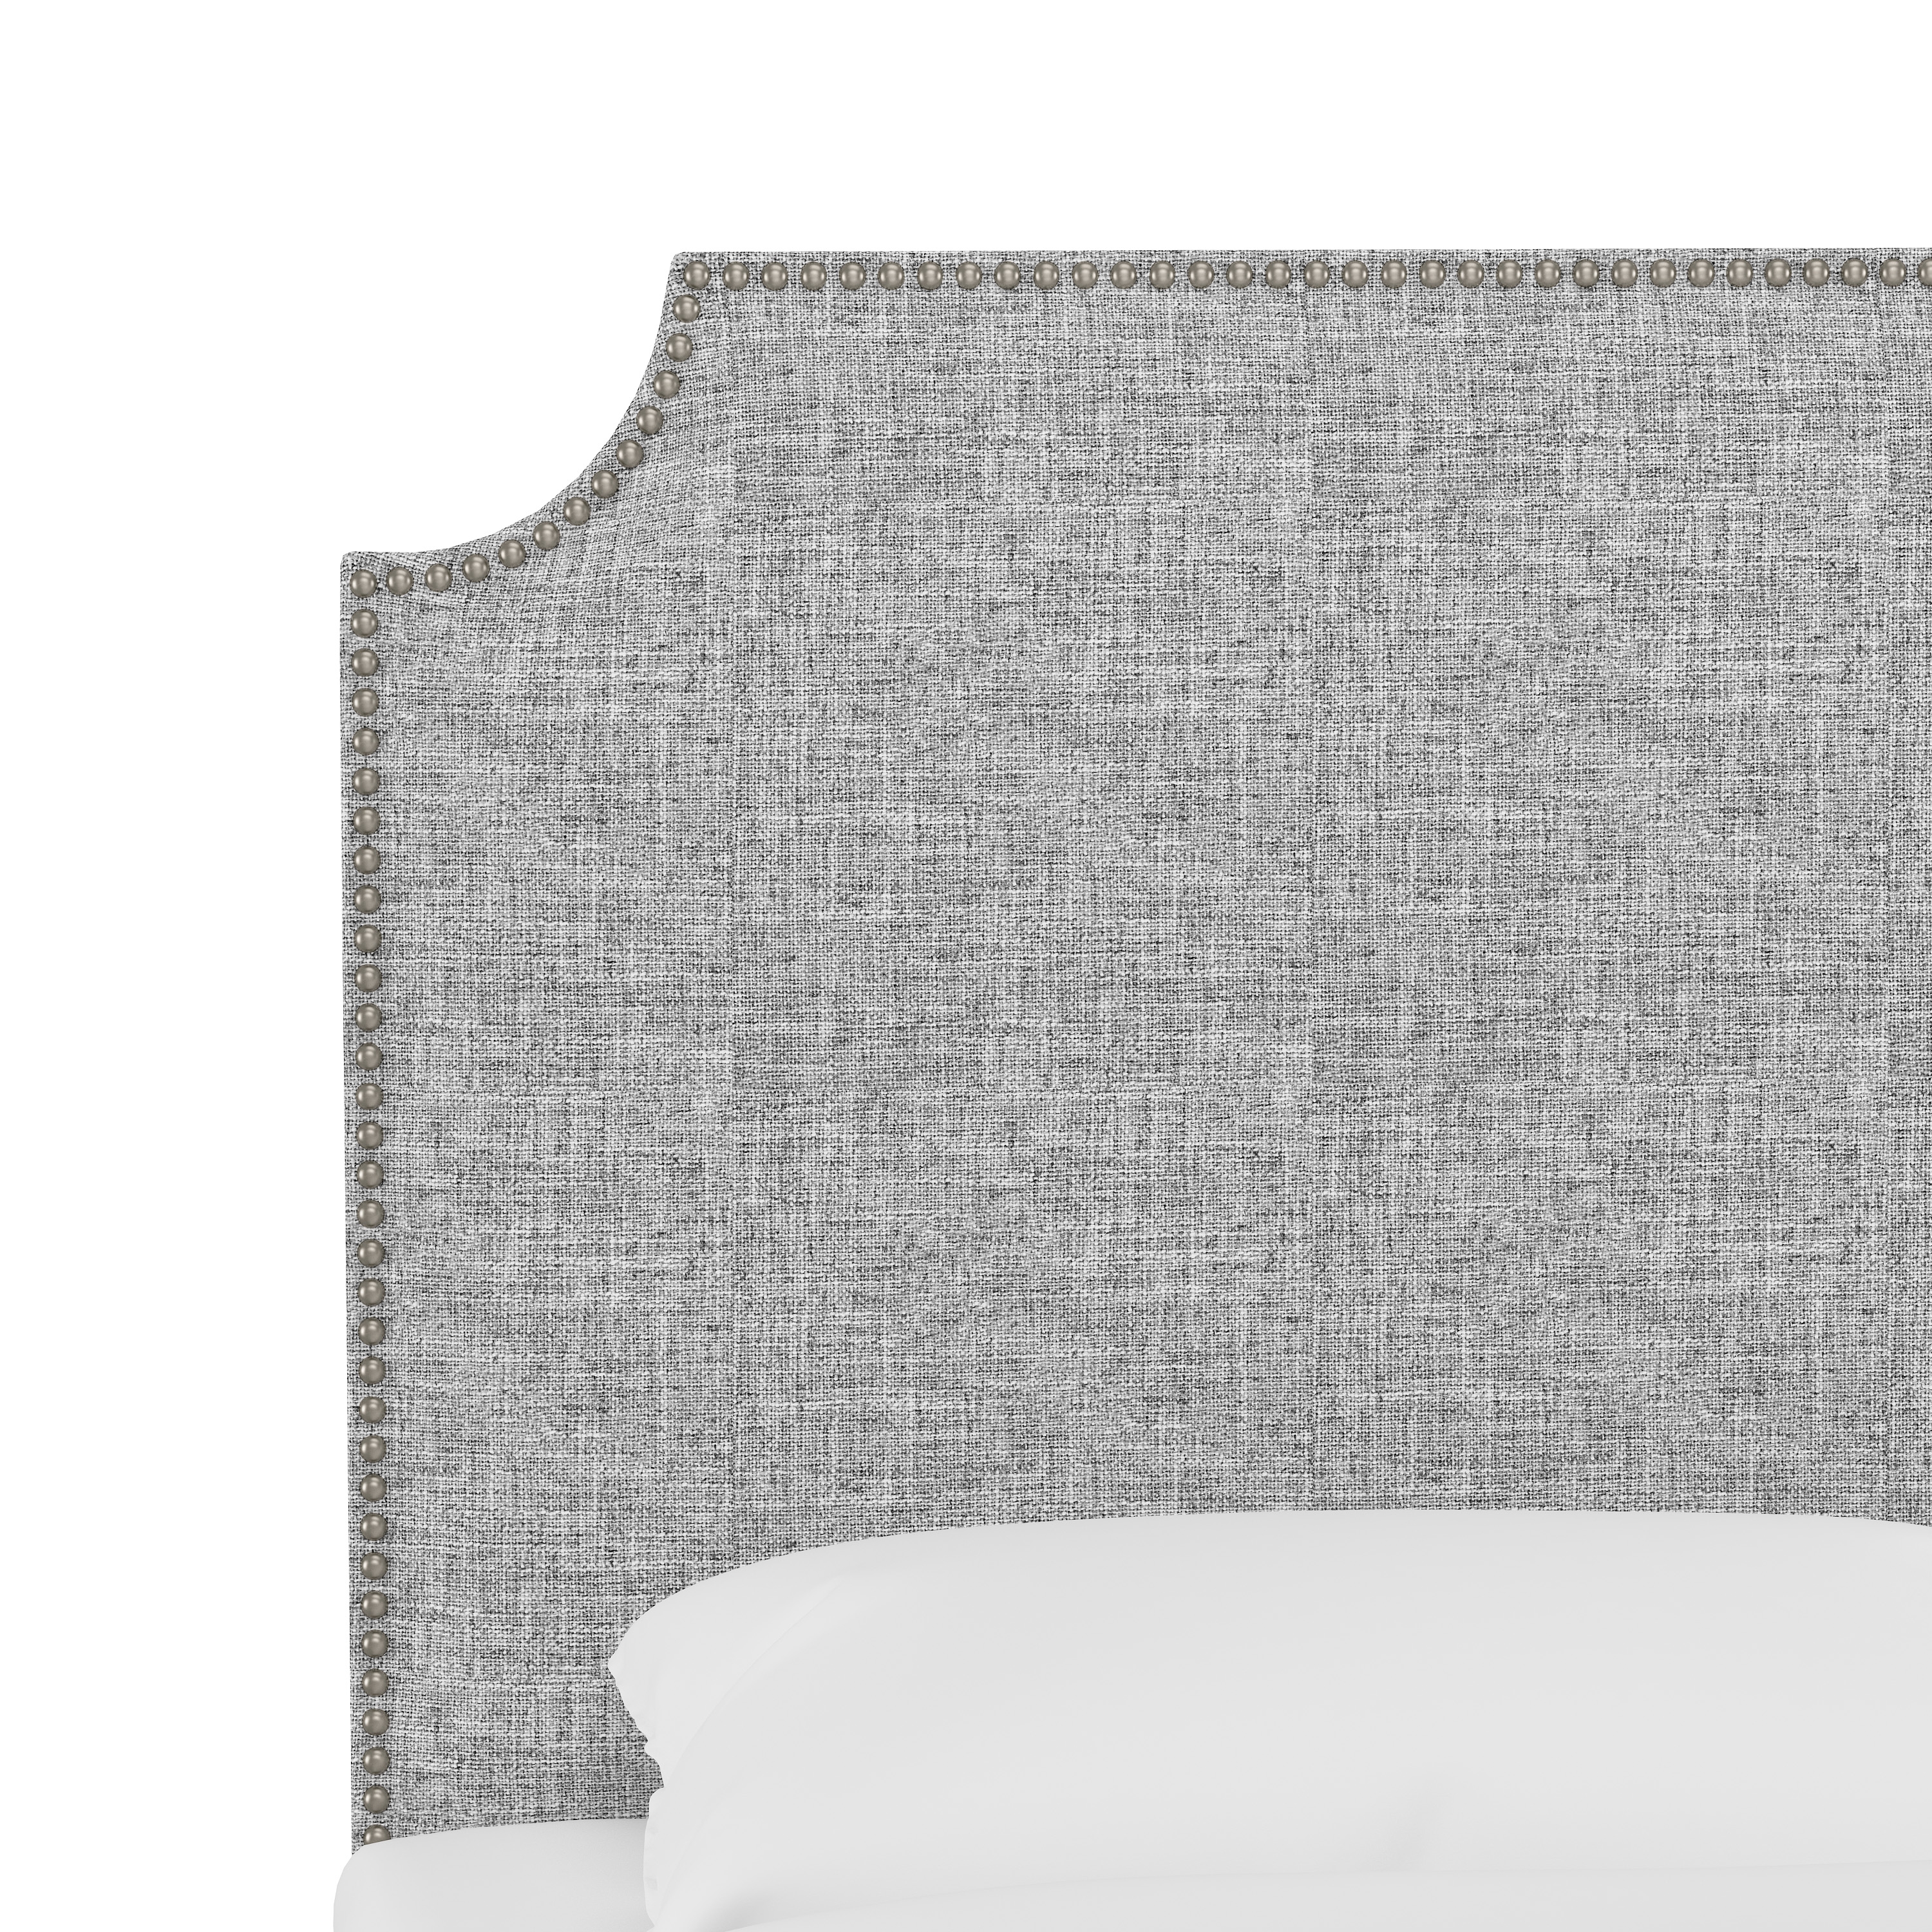 Queen Madison Headboard, Pewter Nailheads - Image 3